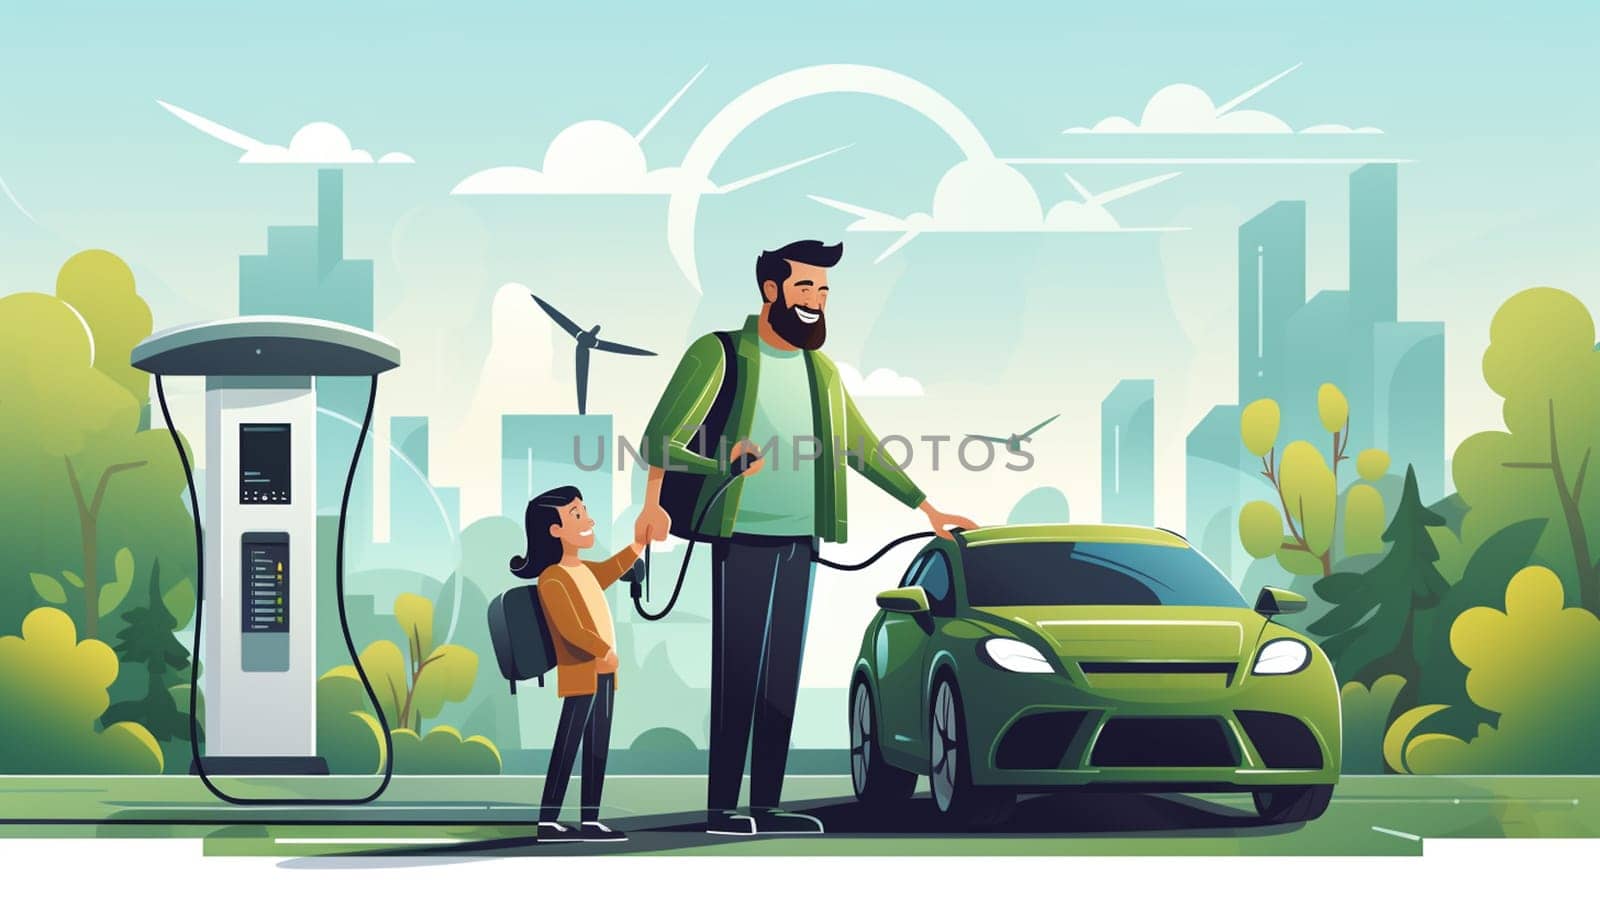 Futuristic Electric Vehicle, Electric Car Charging Station, Environmentally Friendly Transportation, Save the Earth Concept, Flat Style Illustration. High quality photo